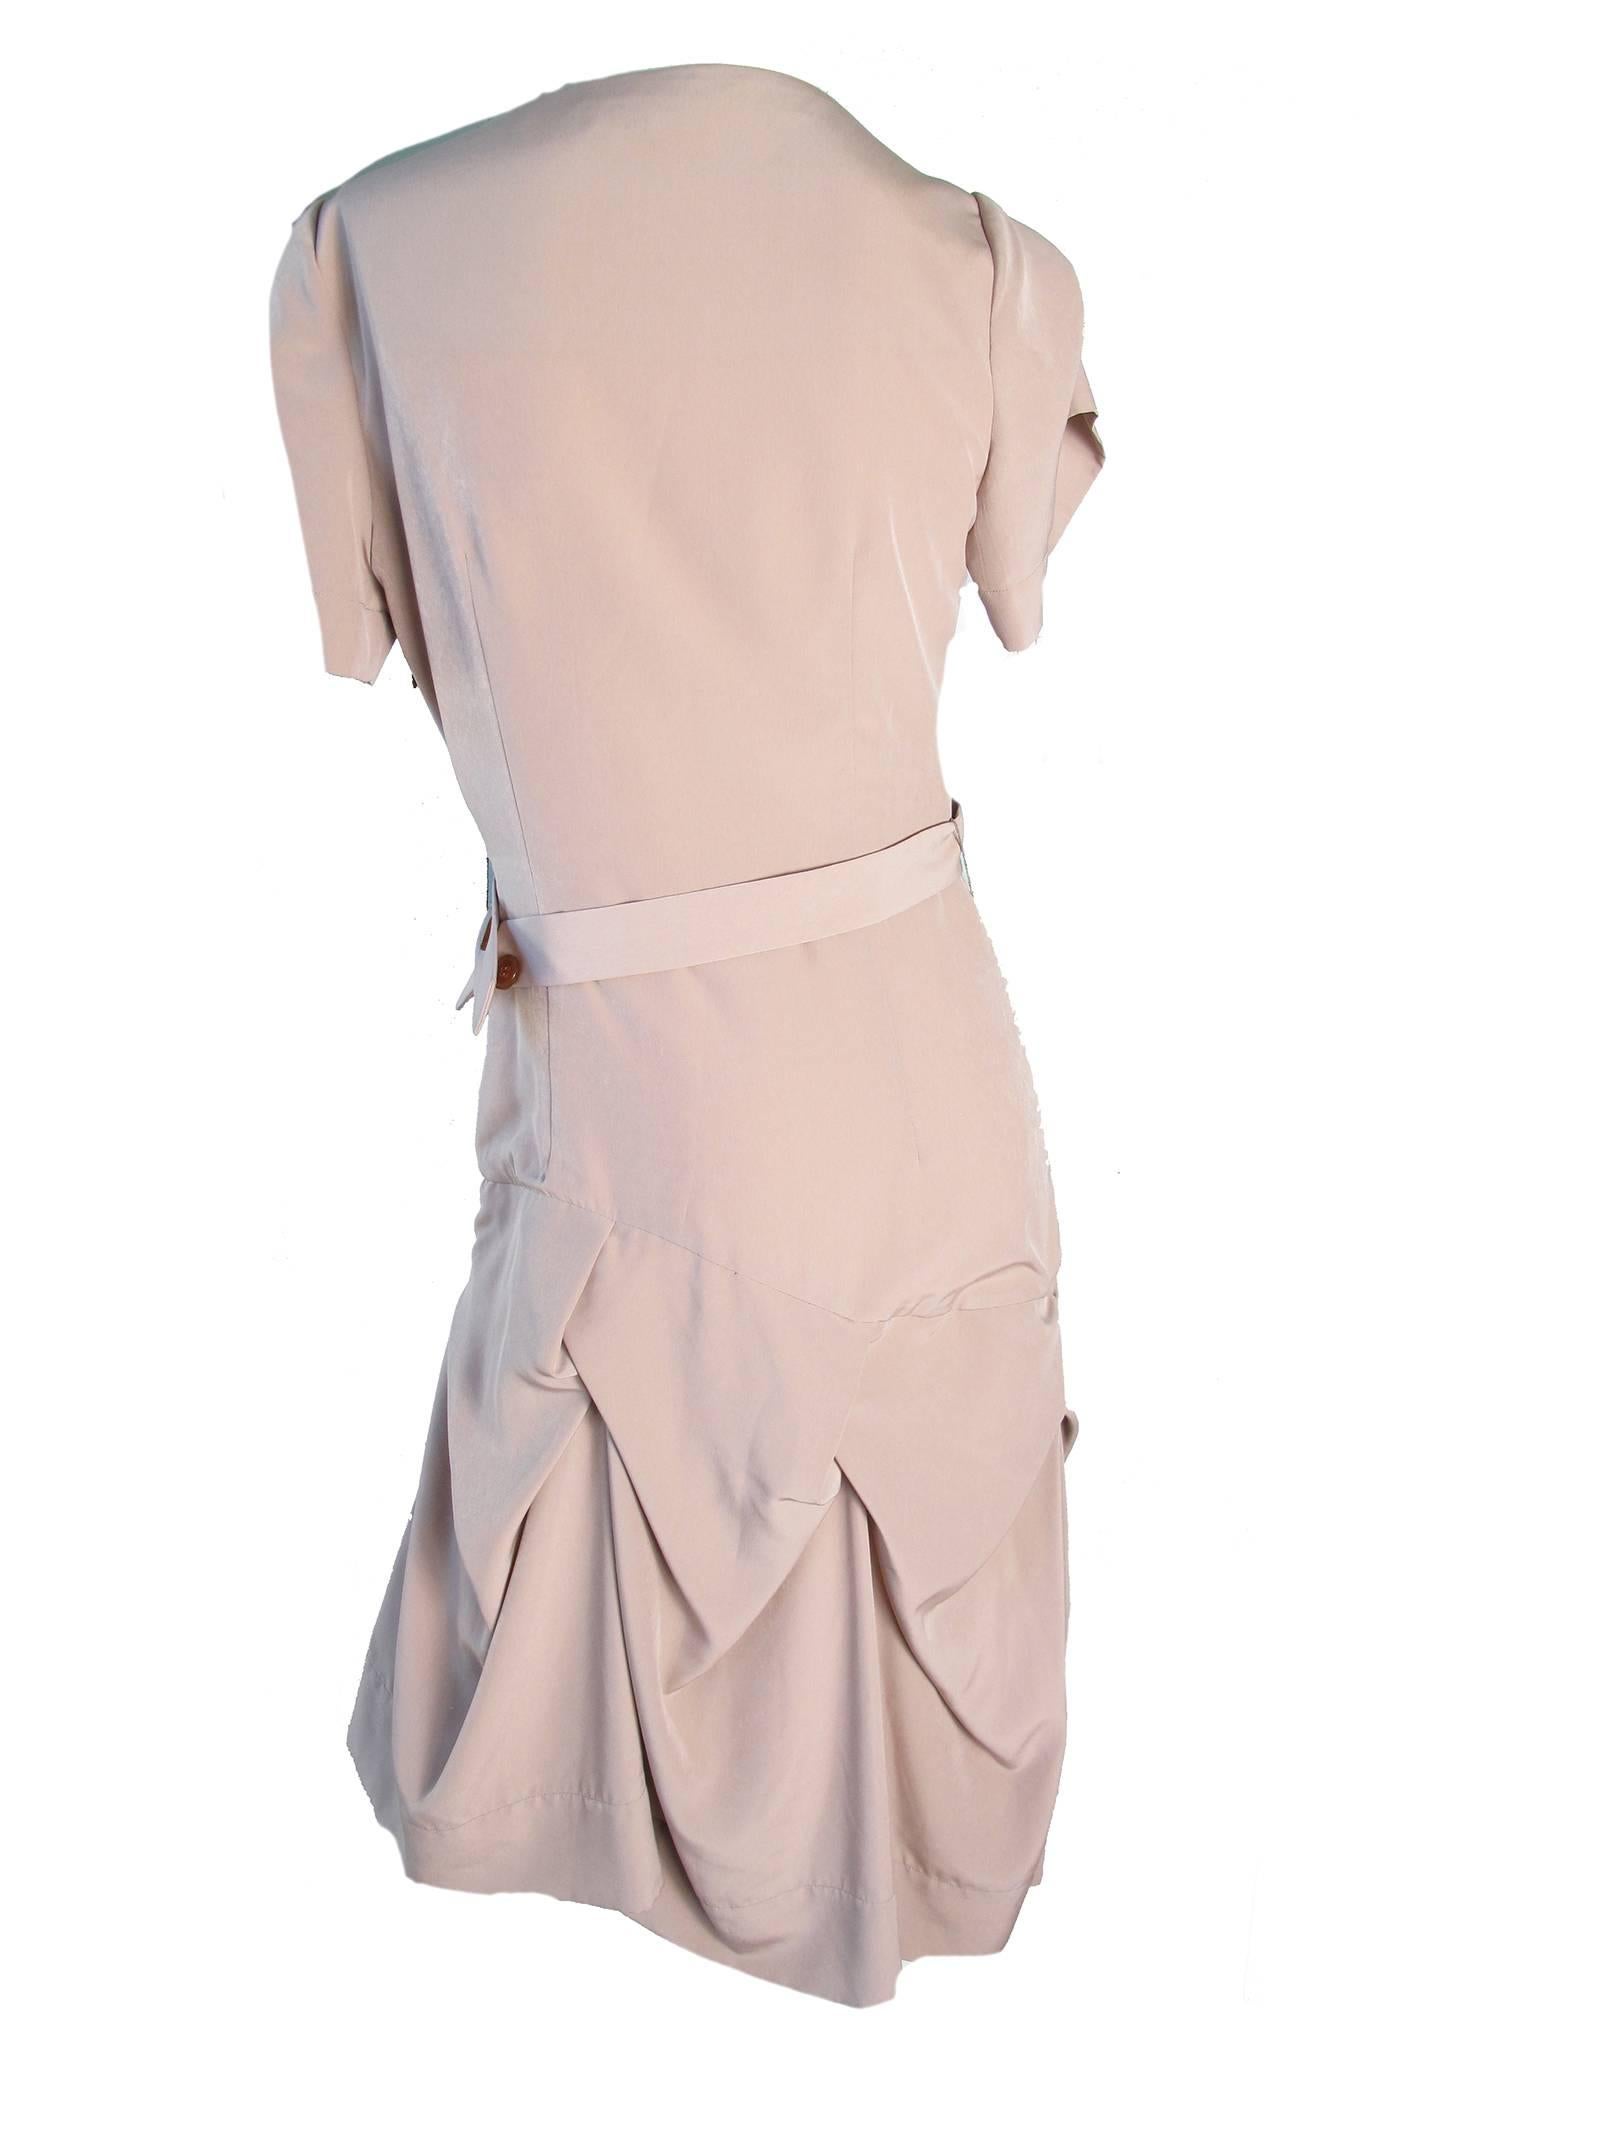 Vivienne Westwood red label mauve dress with interesting pleating at hem. polyester. Condition: good, discoloration on back right back. Size US 8
We accept returns for refund, please see our terms.  We offer free ground shipping within the US. 
